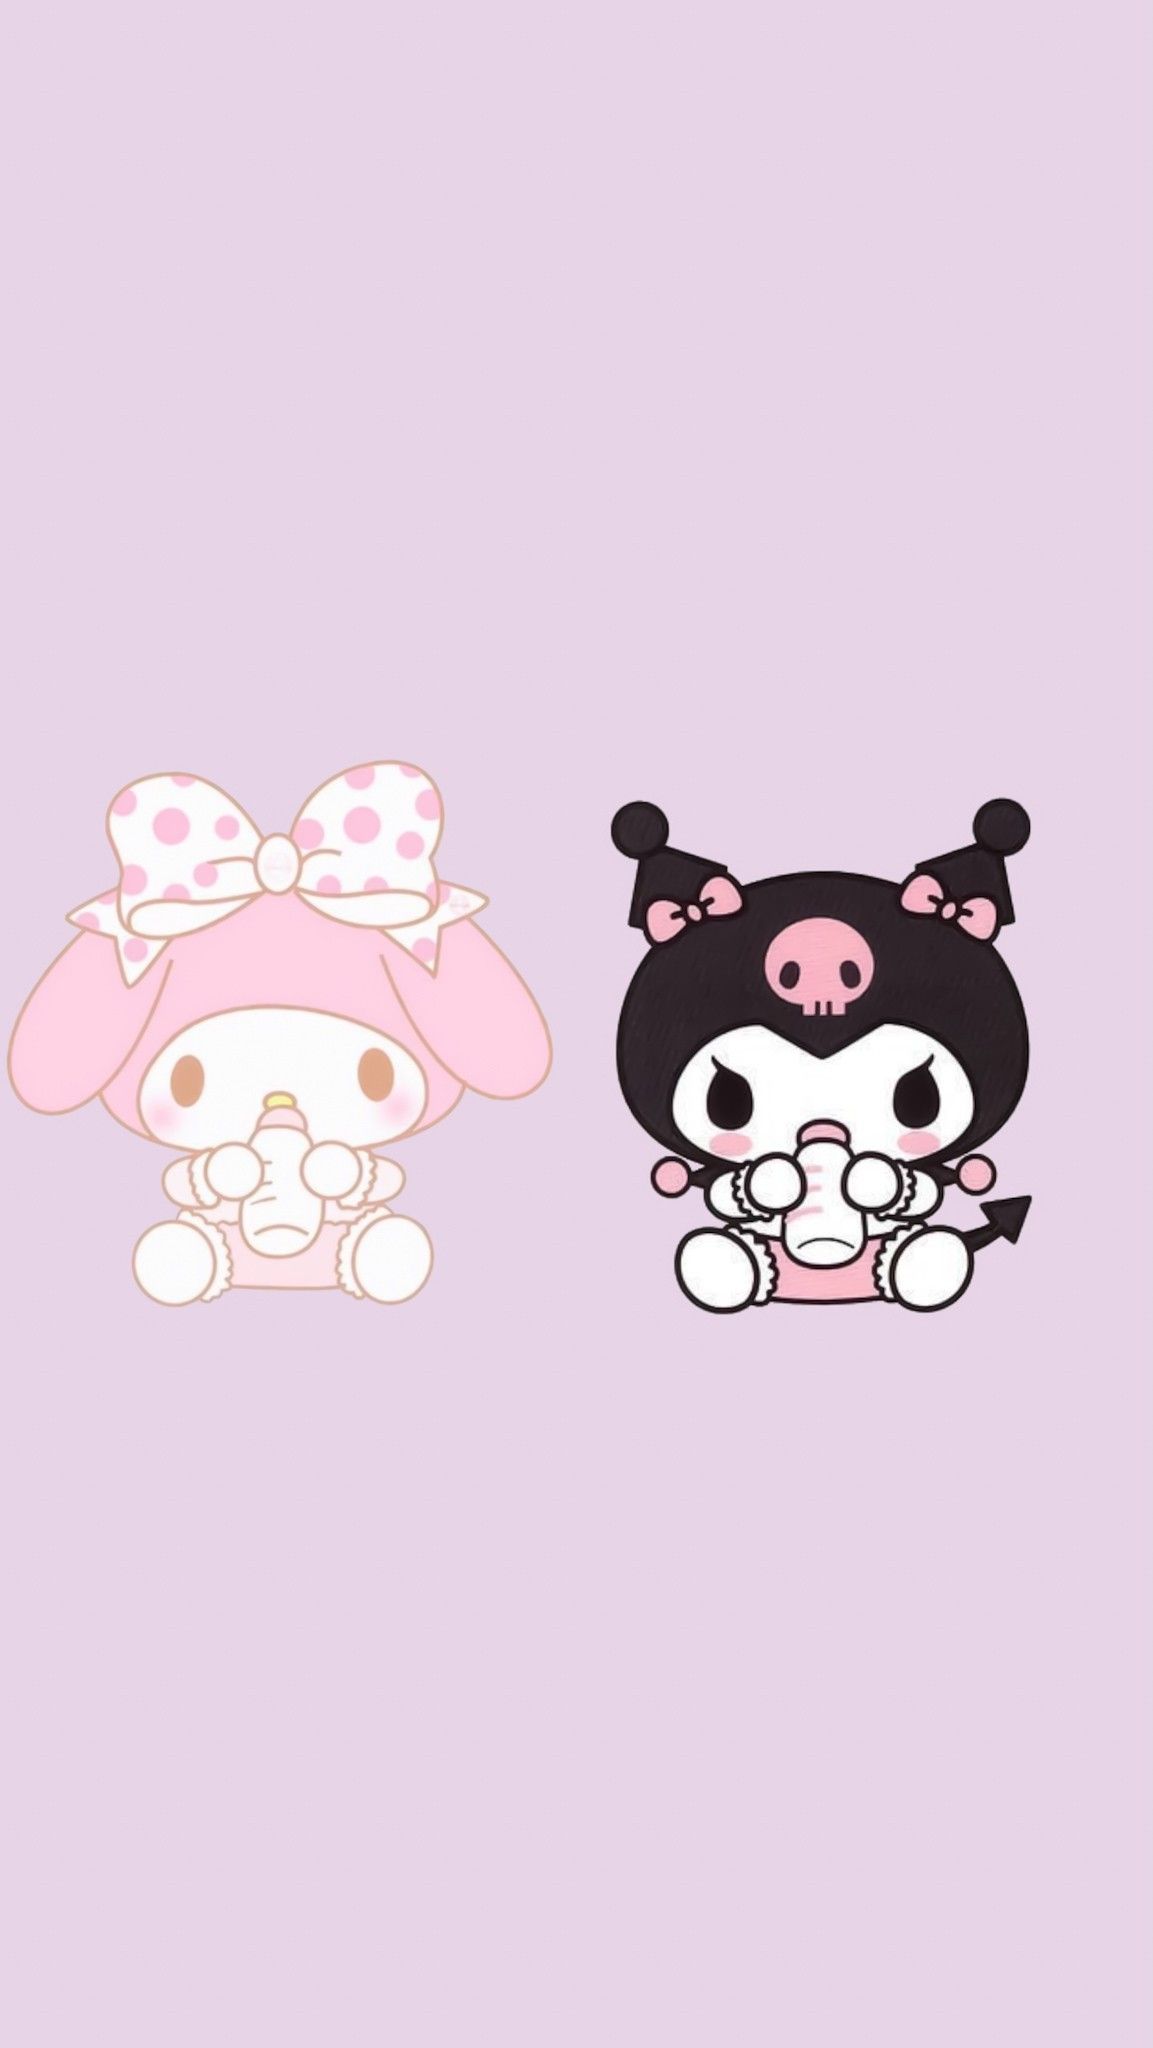 Melody and Kuromi Wallpaper Free Melody and Kuromi Background